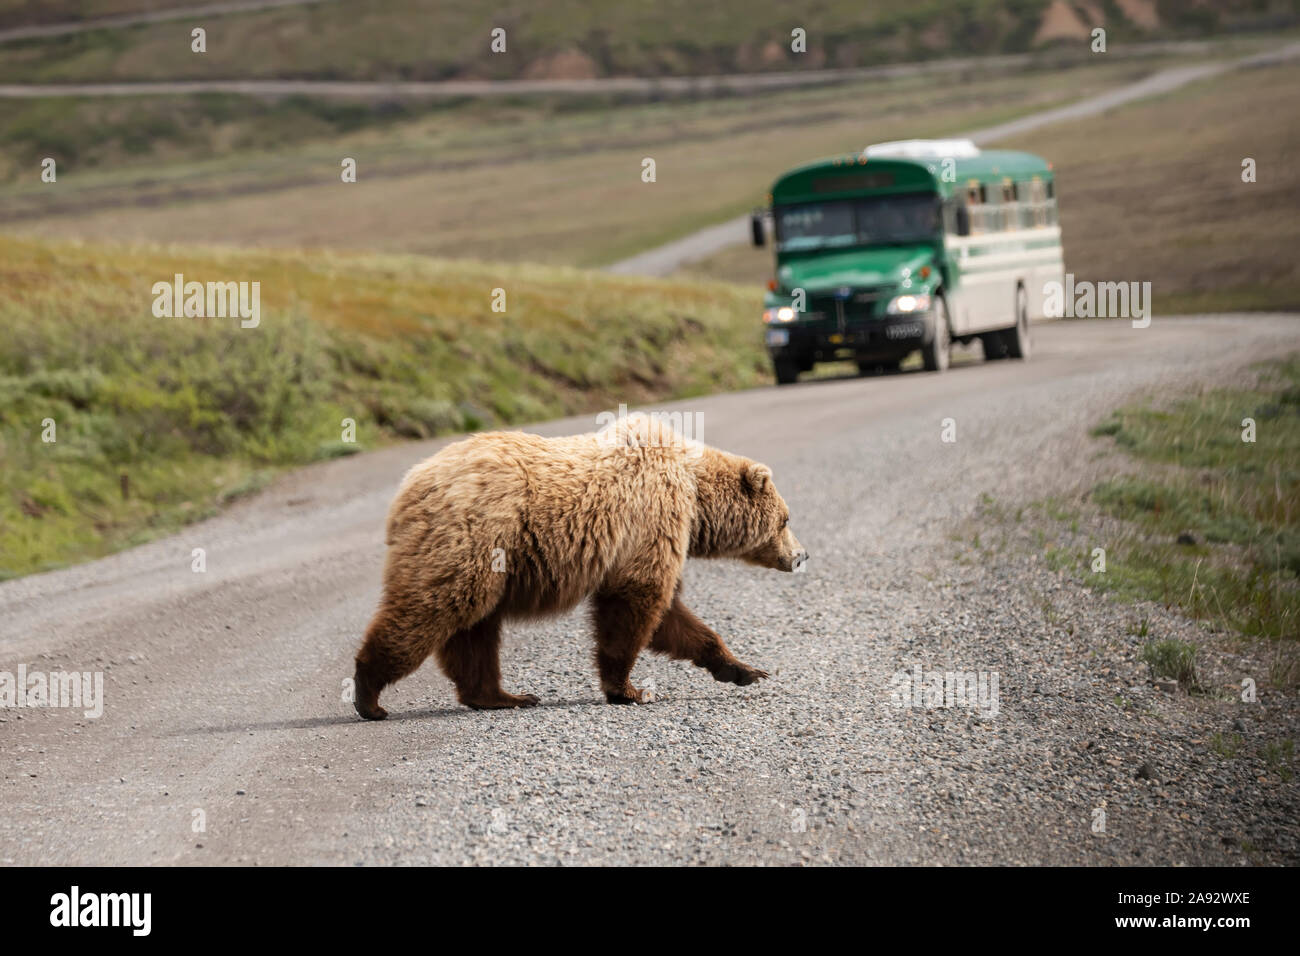 Grizzy bear sow (Ursus arctos hornbills) crosses Park Road as Park tour bus is approaching. Her cubs will soon follow her. Denali National Park and... Stock Photo